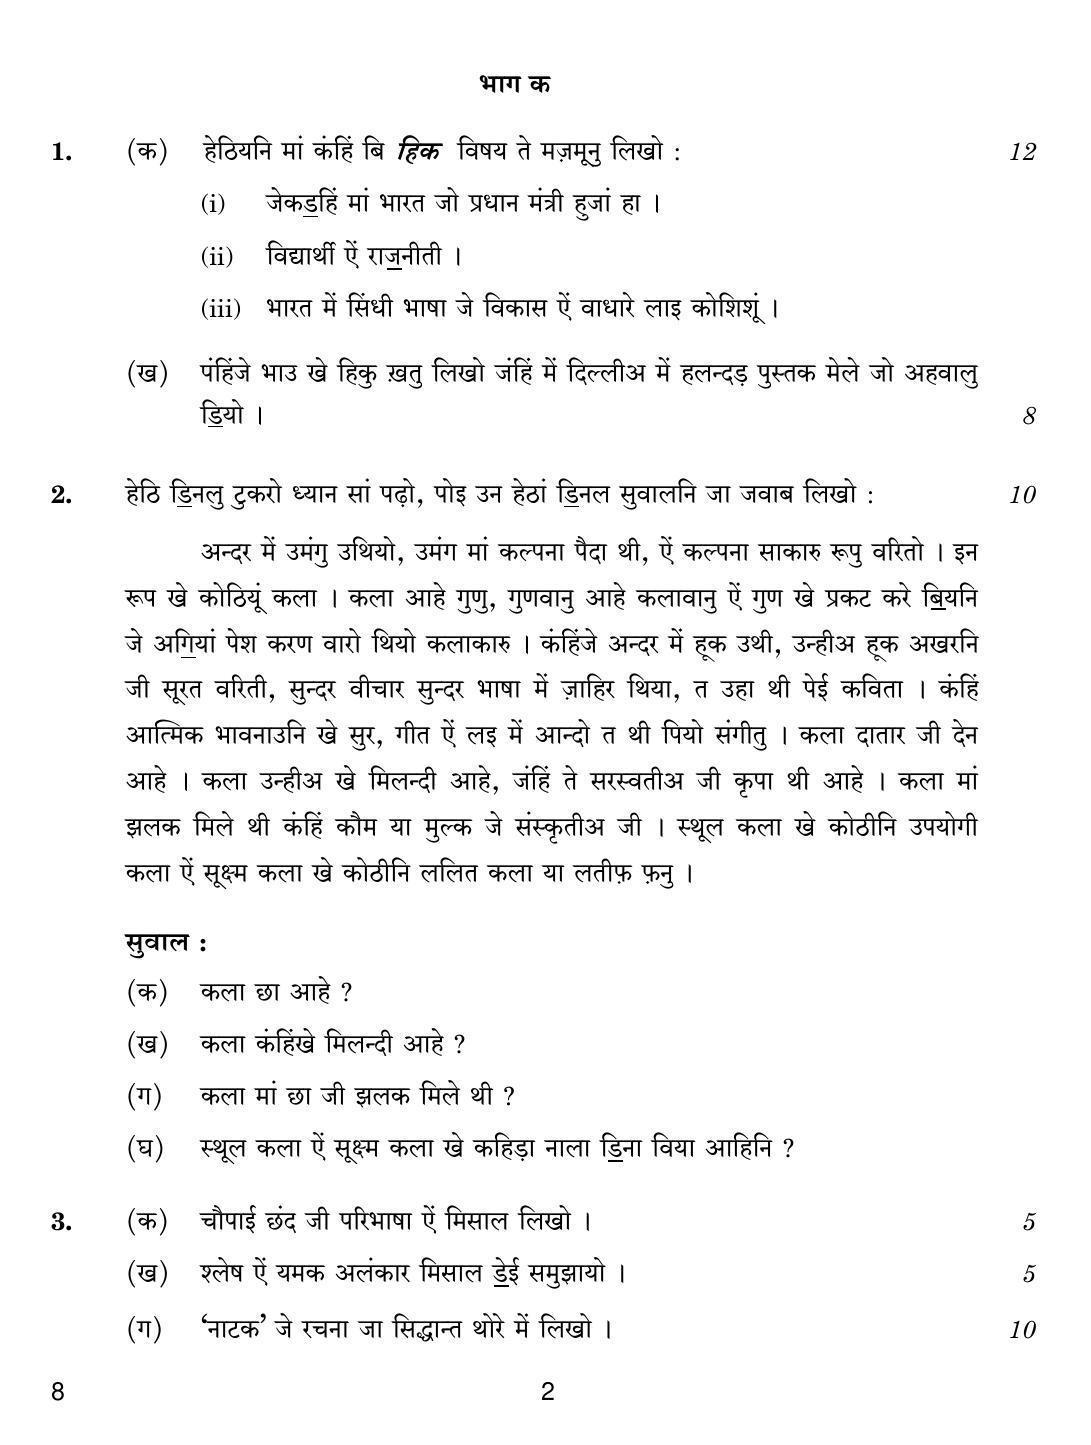 CBSE Class 12 8 SINDHI 2018 Question Paper - Page 2